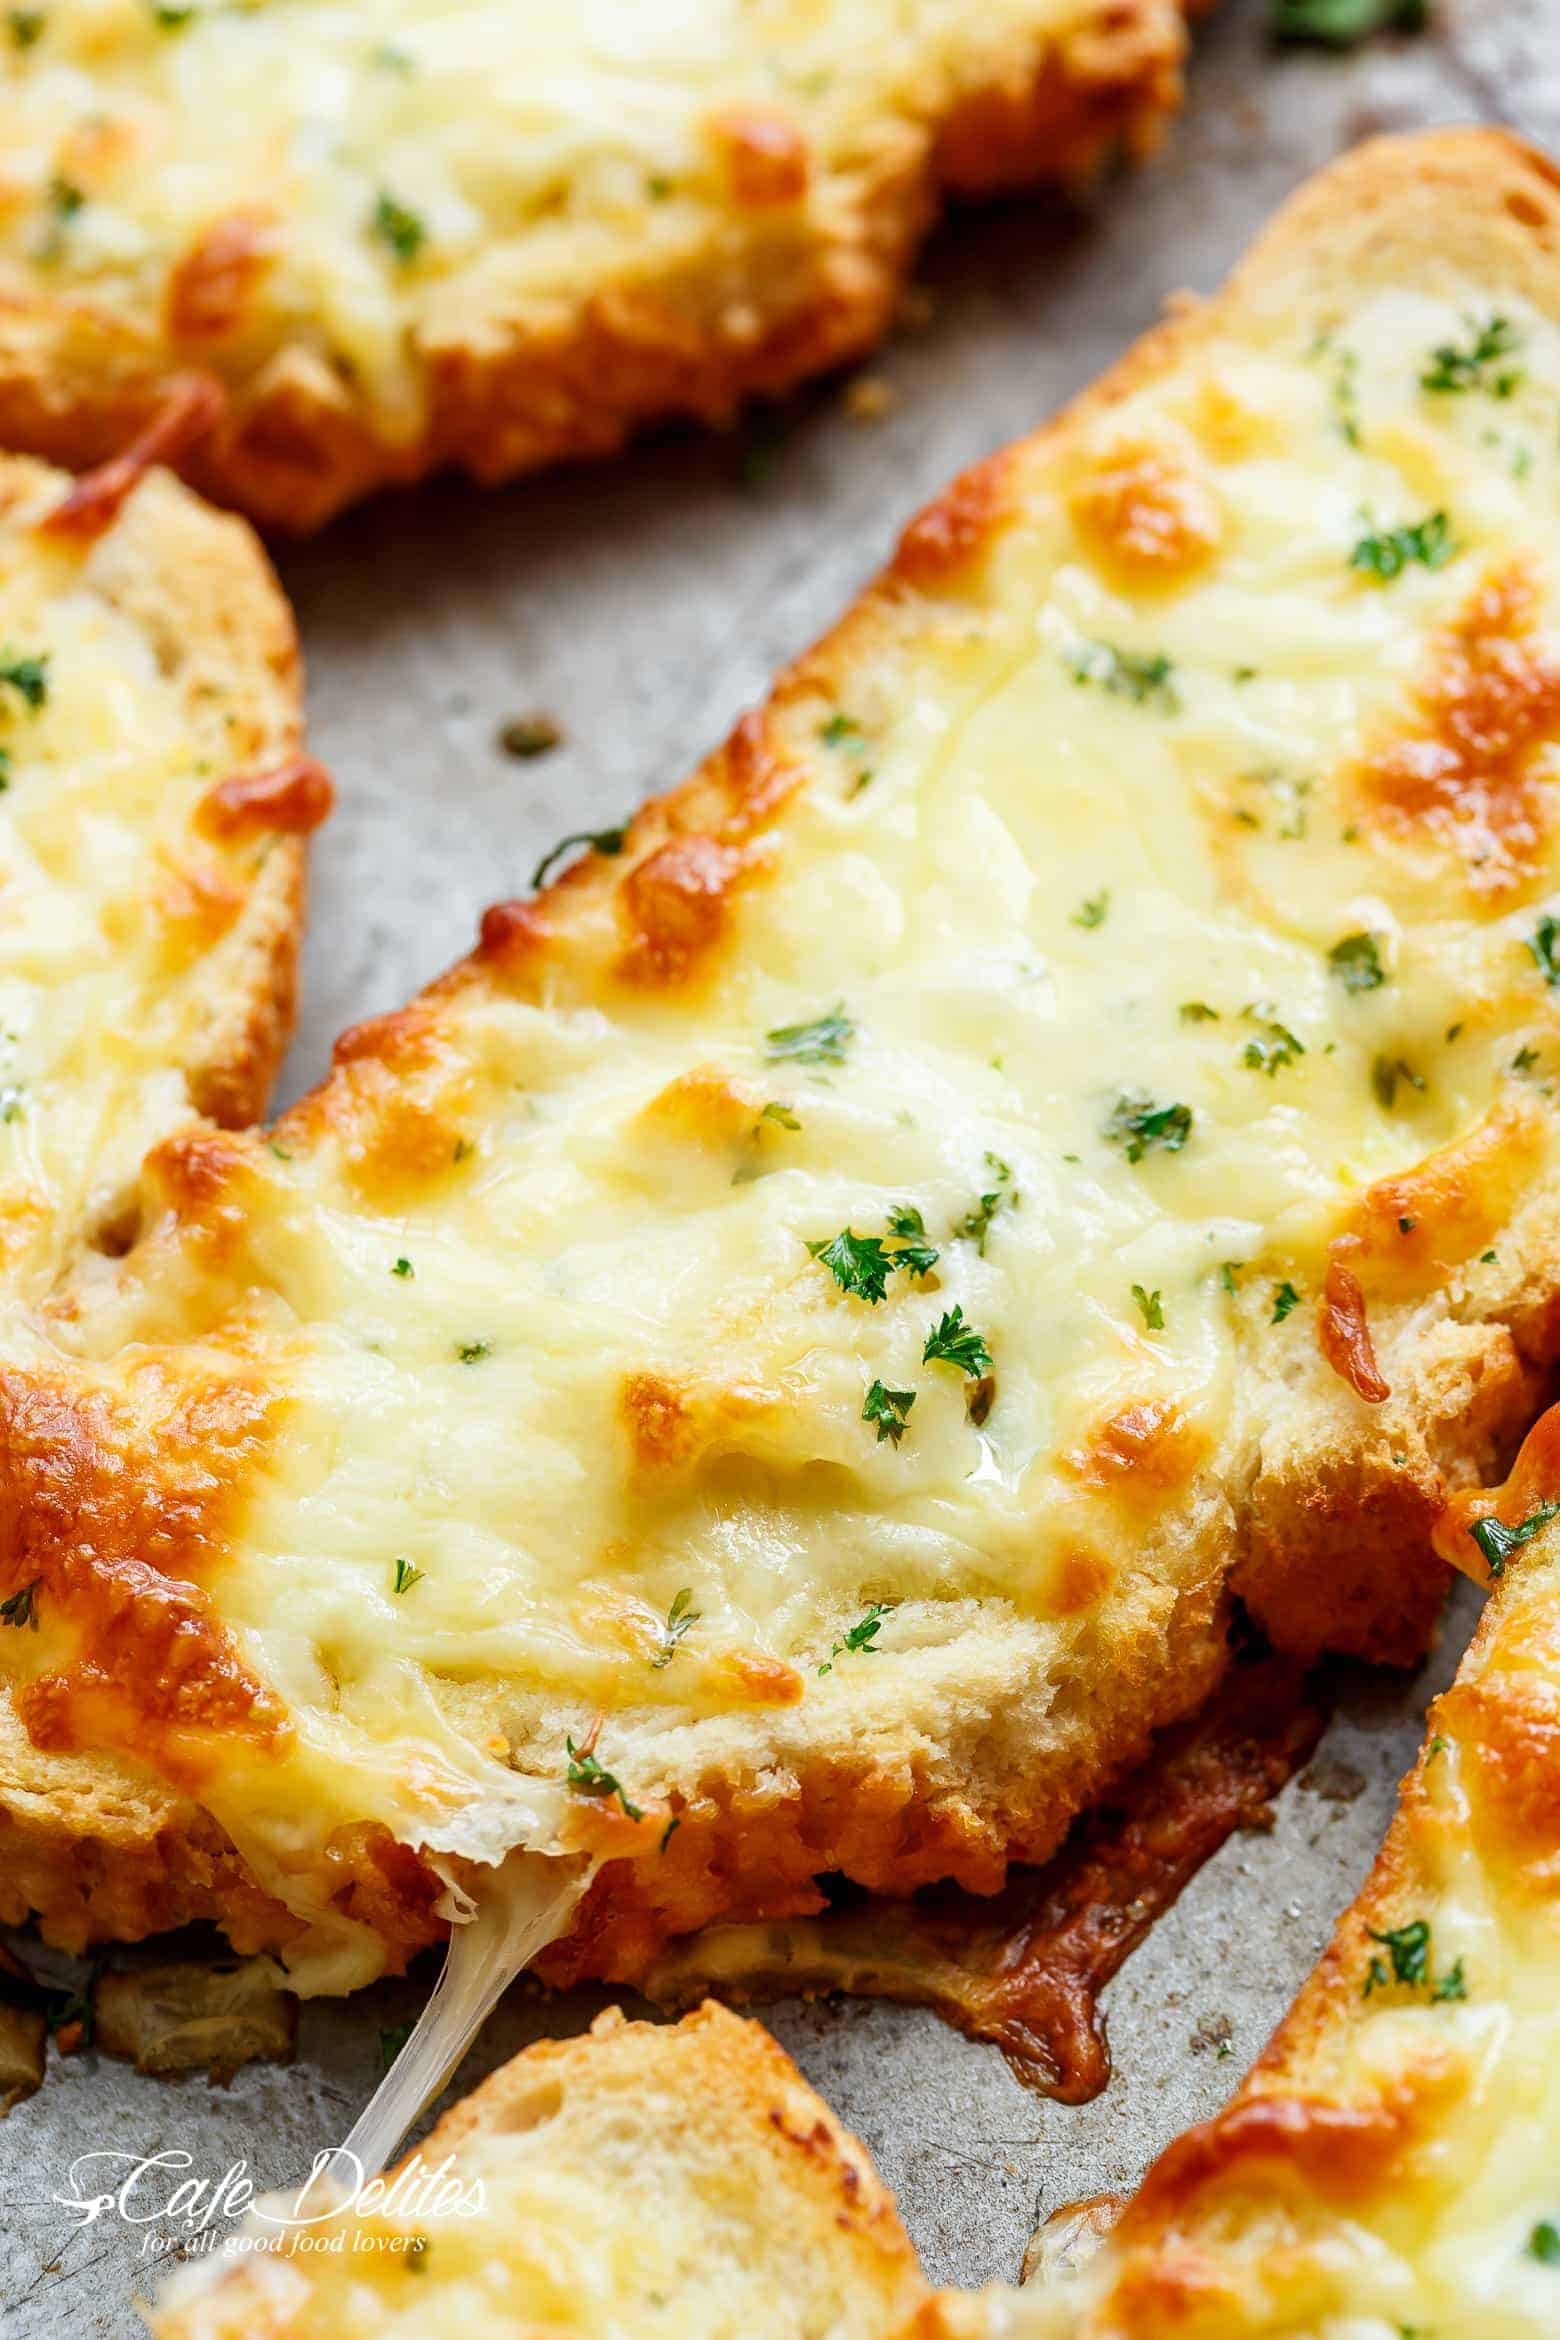 Top 20 Cheese Garlic Bread Recipe - Best Recipes Ideas and Collections